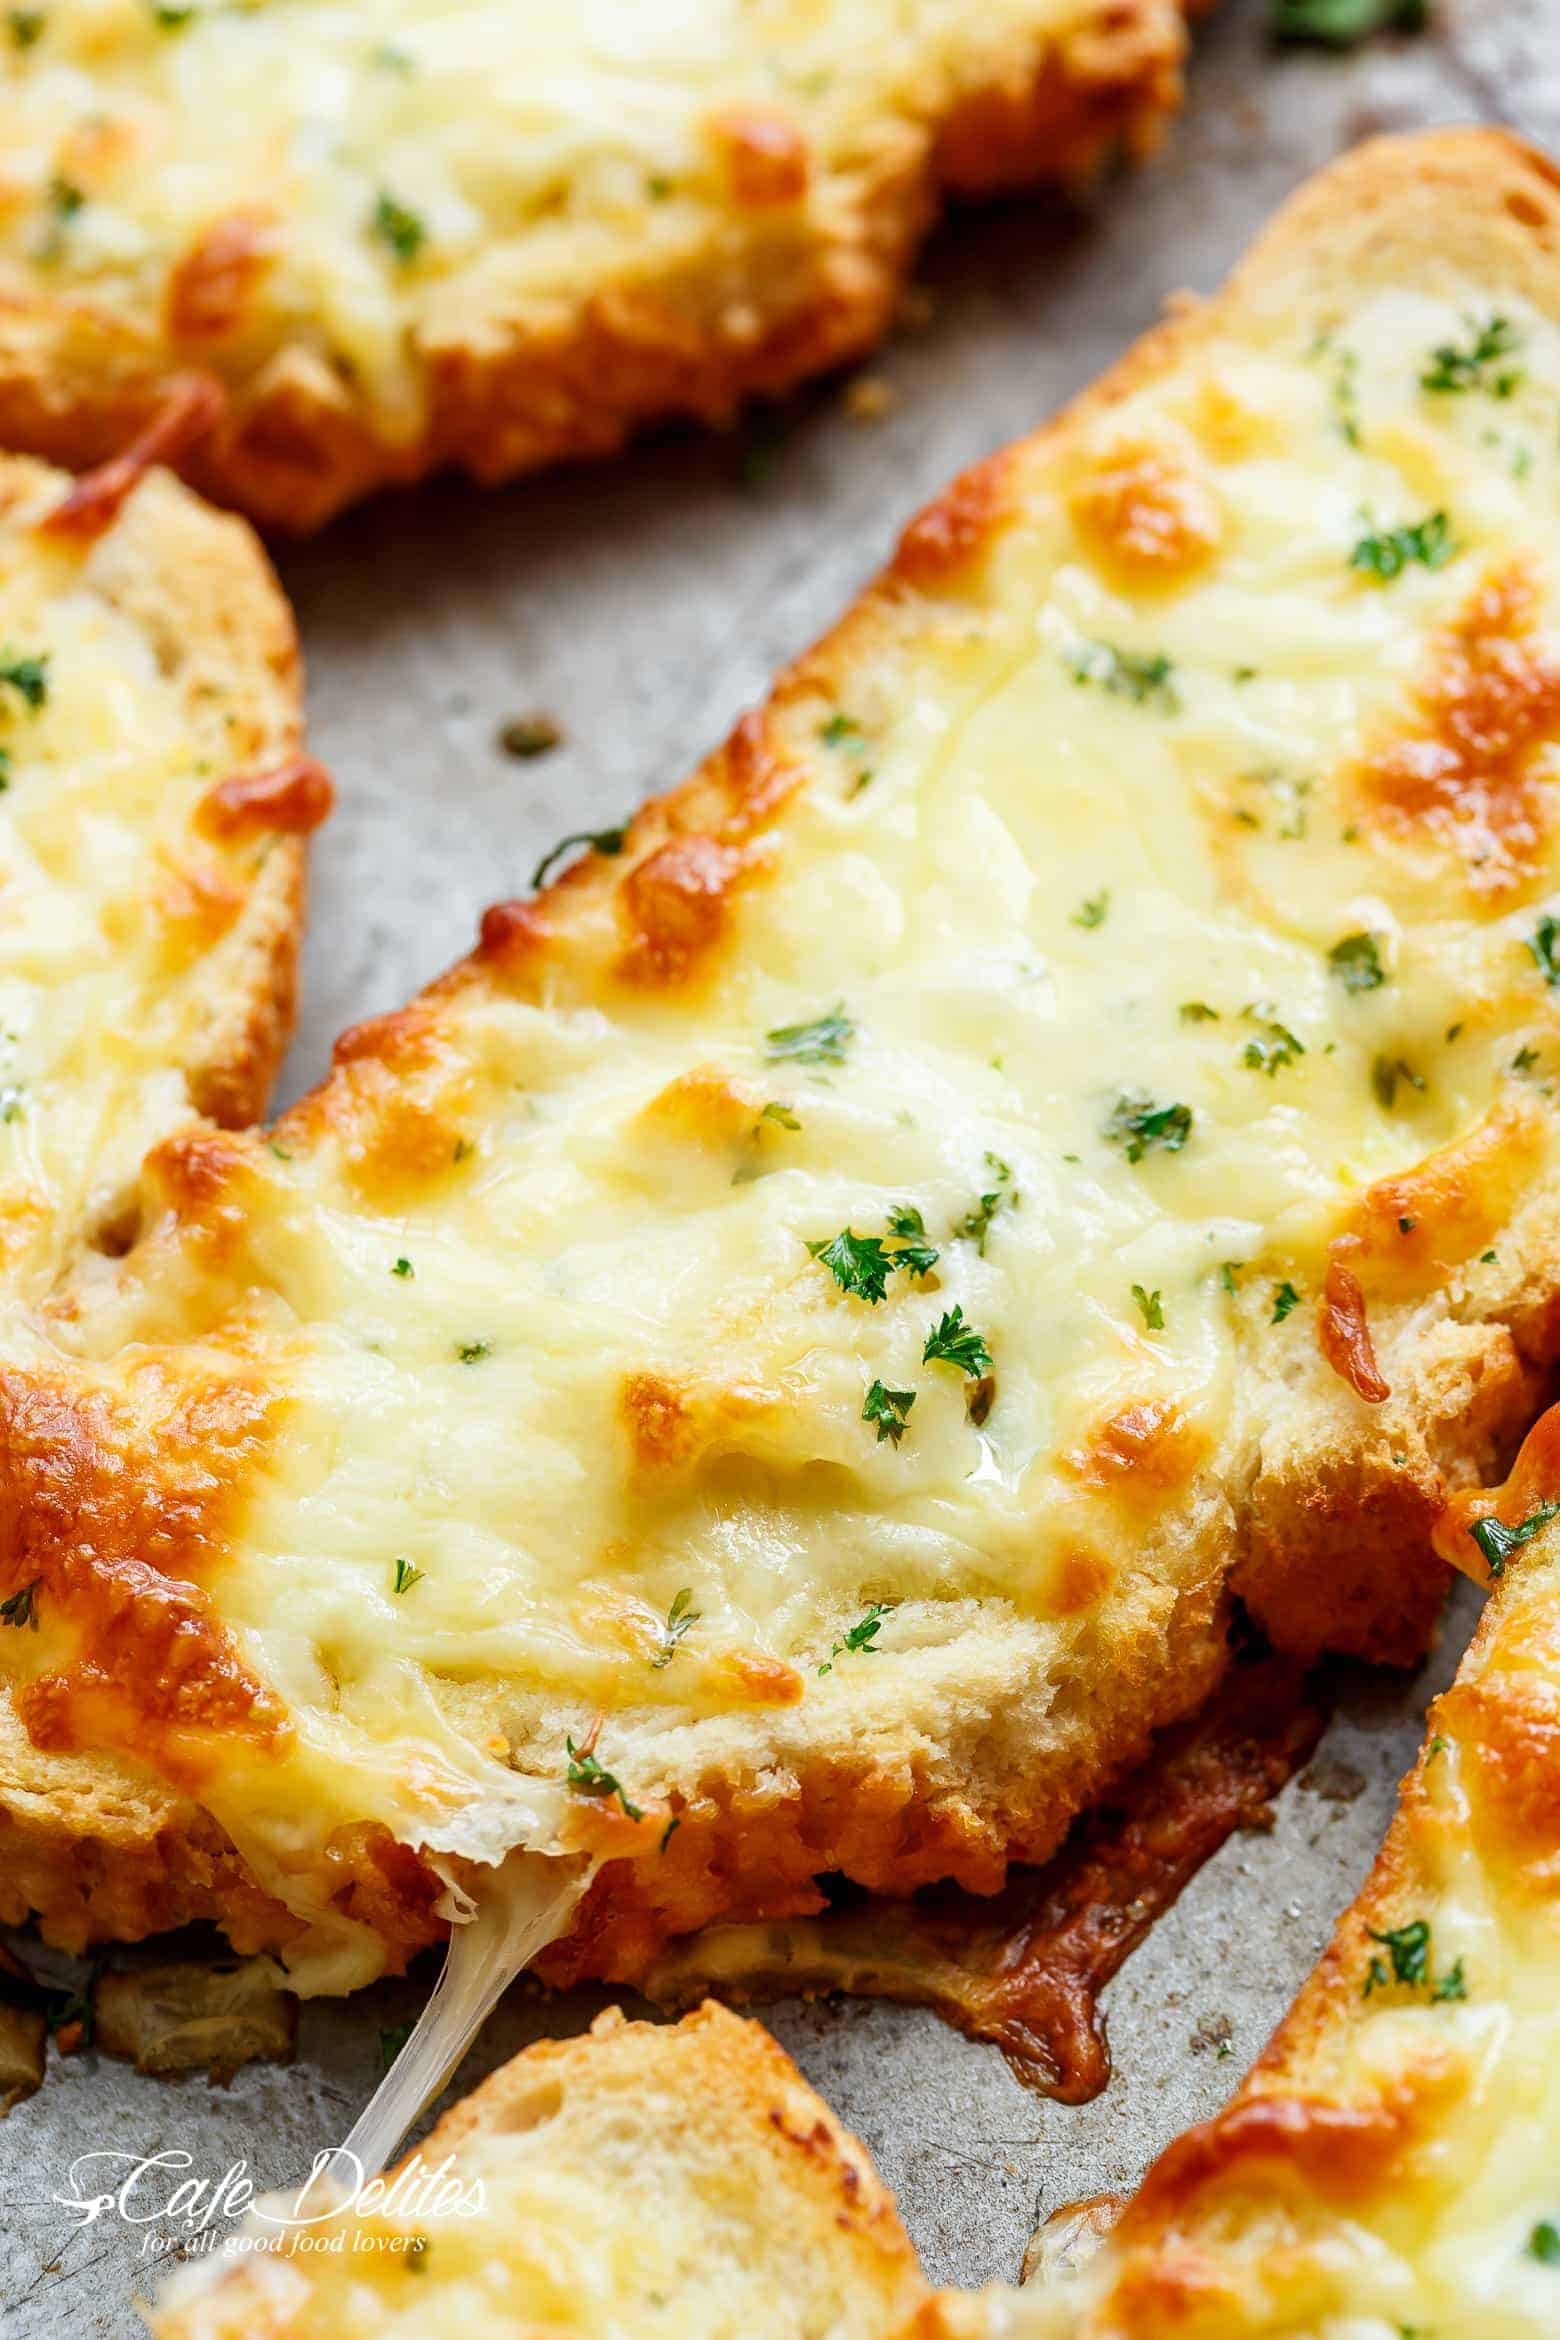 Top 20 Cheese Garlic Bread Recipe - Best Recipes Ideas and Collections